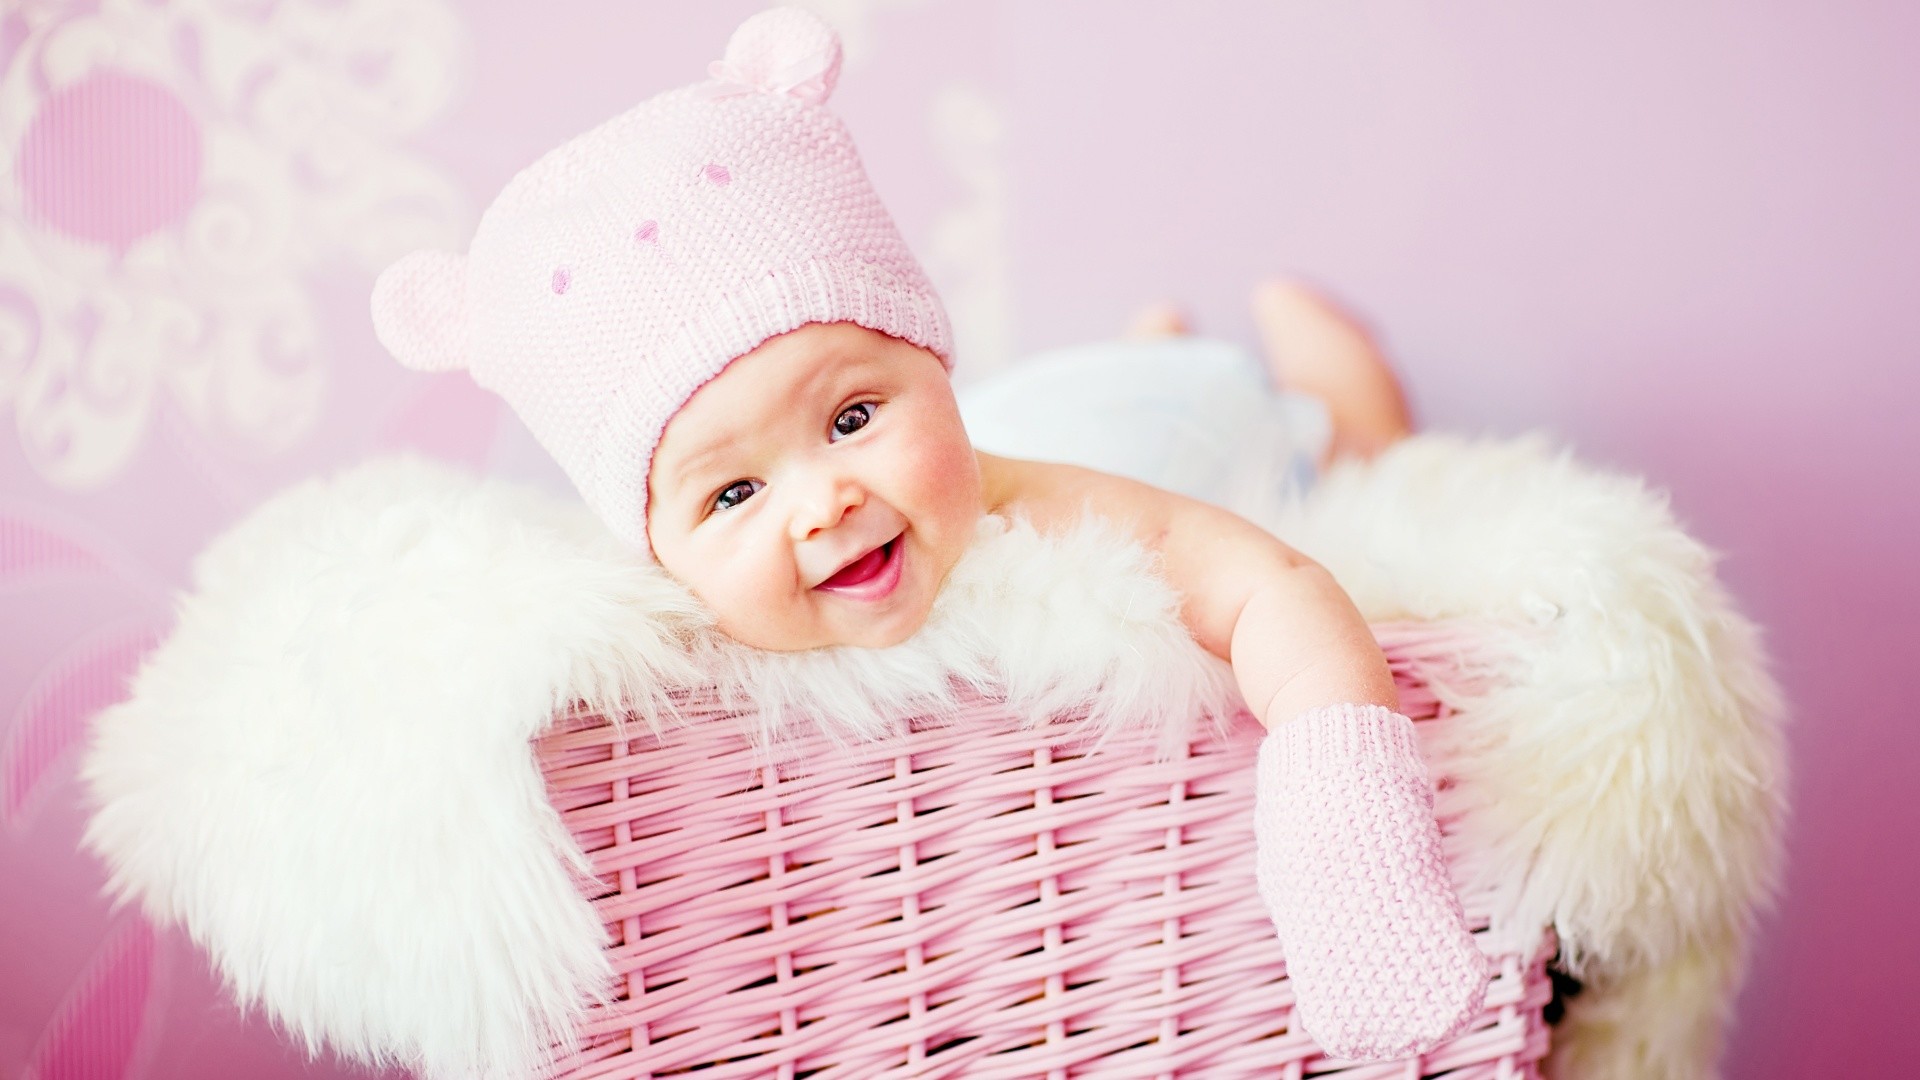 1920x1080 Cute Laughing Baby Wallpapers